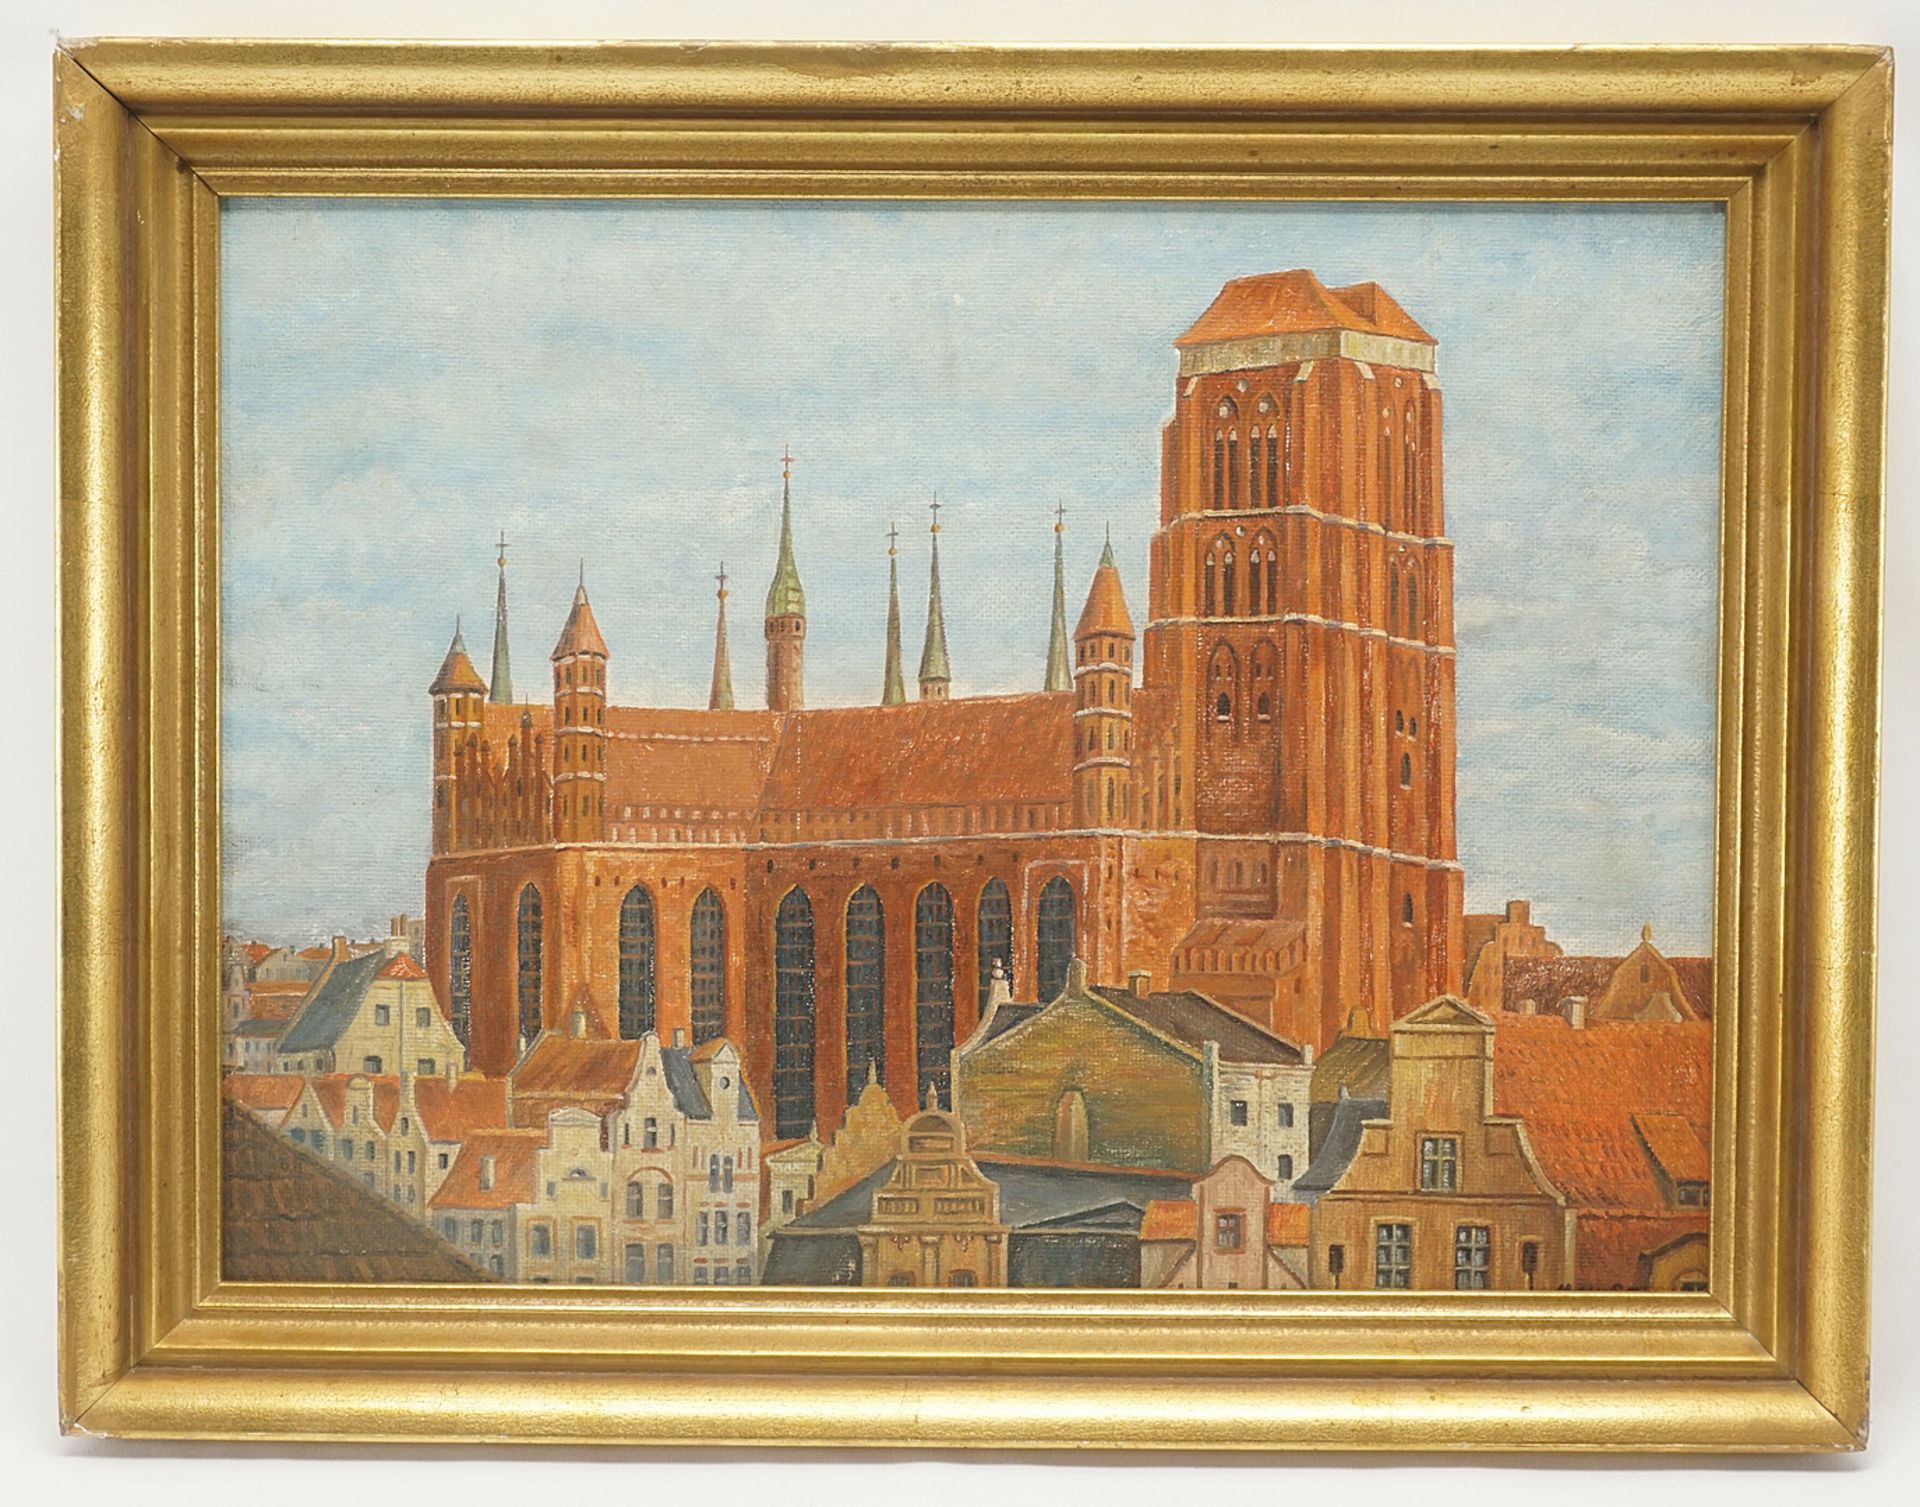 M. Hilse, St. Mary's Church in Gdansk - Image 2 of 2